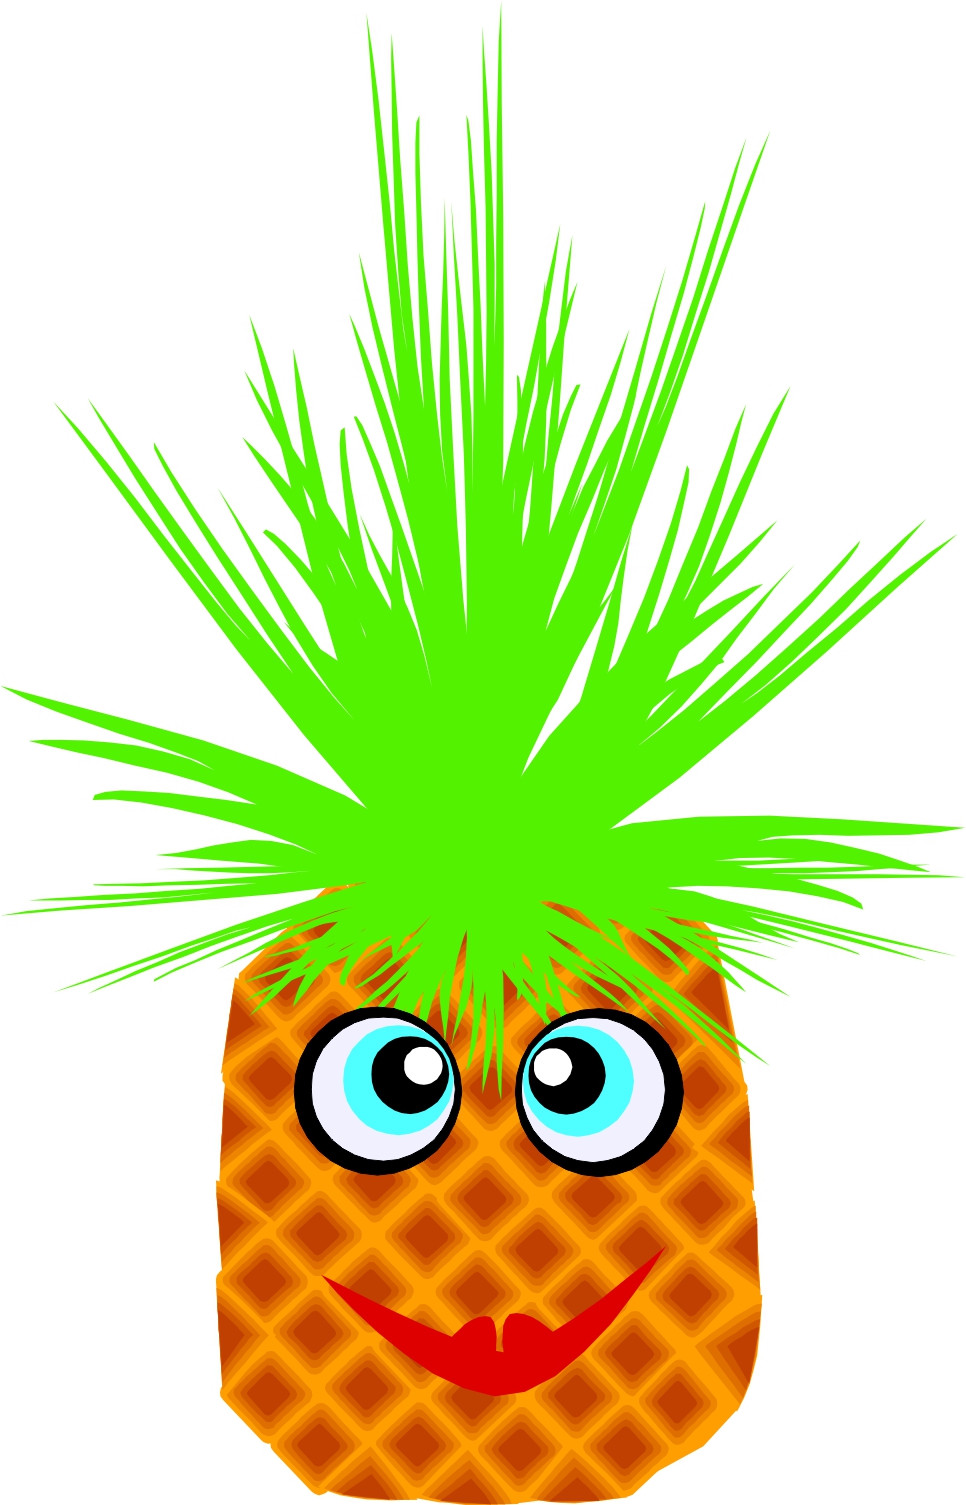 Cartoon Pictures Of Pineapple - Clipart library